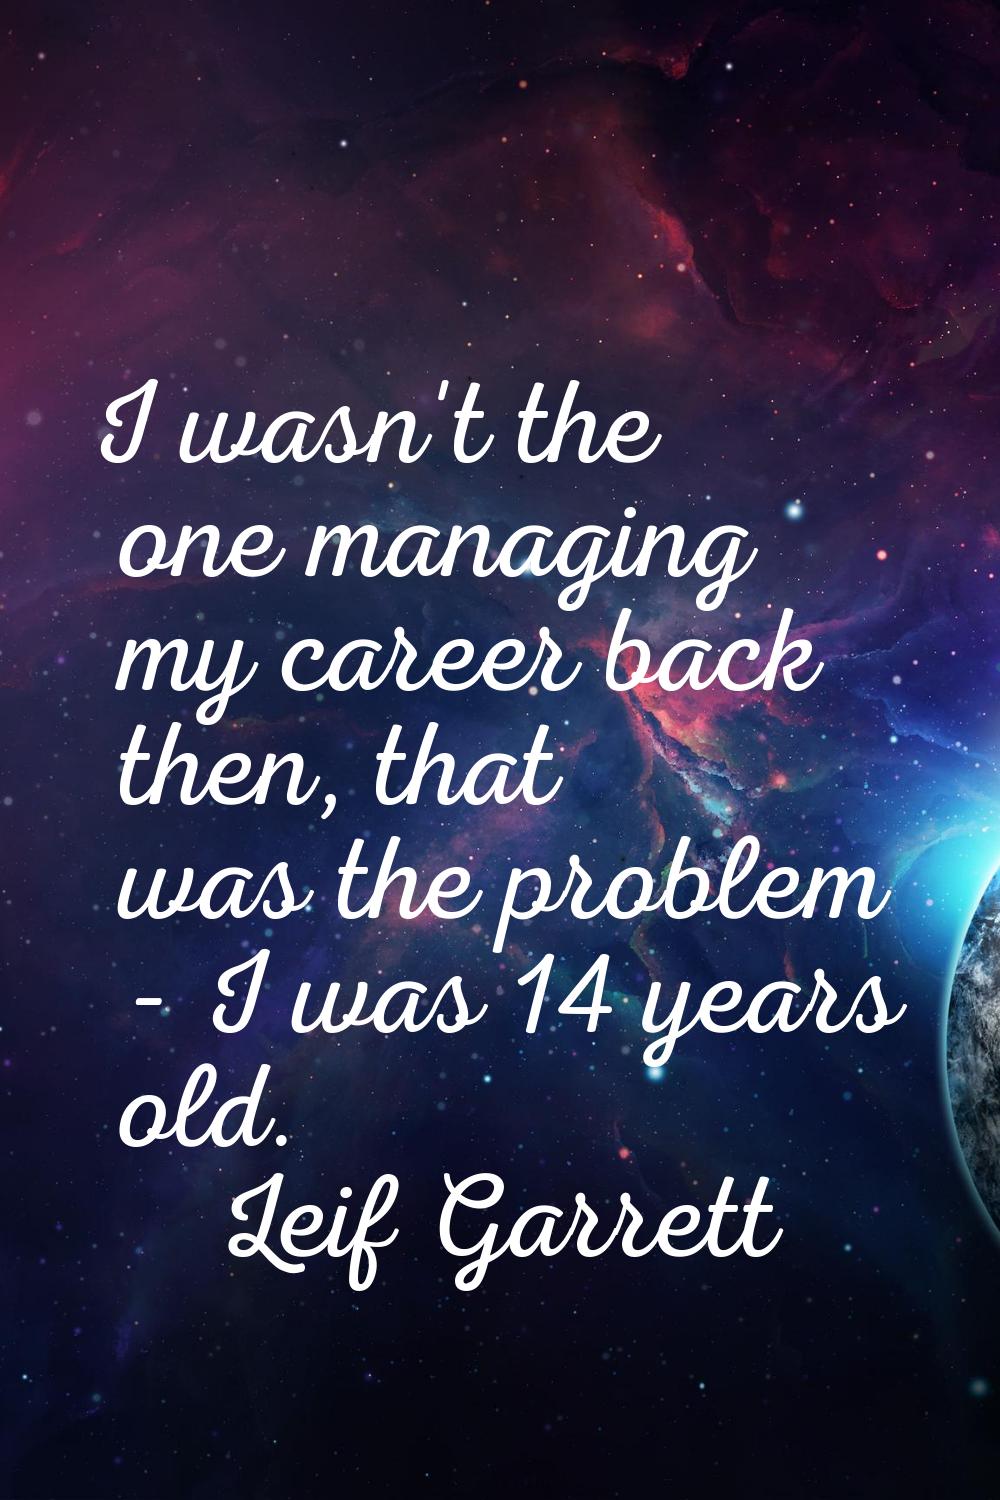 I wasn't the one managing my career back then, that was the problem - I was 14 years old.